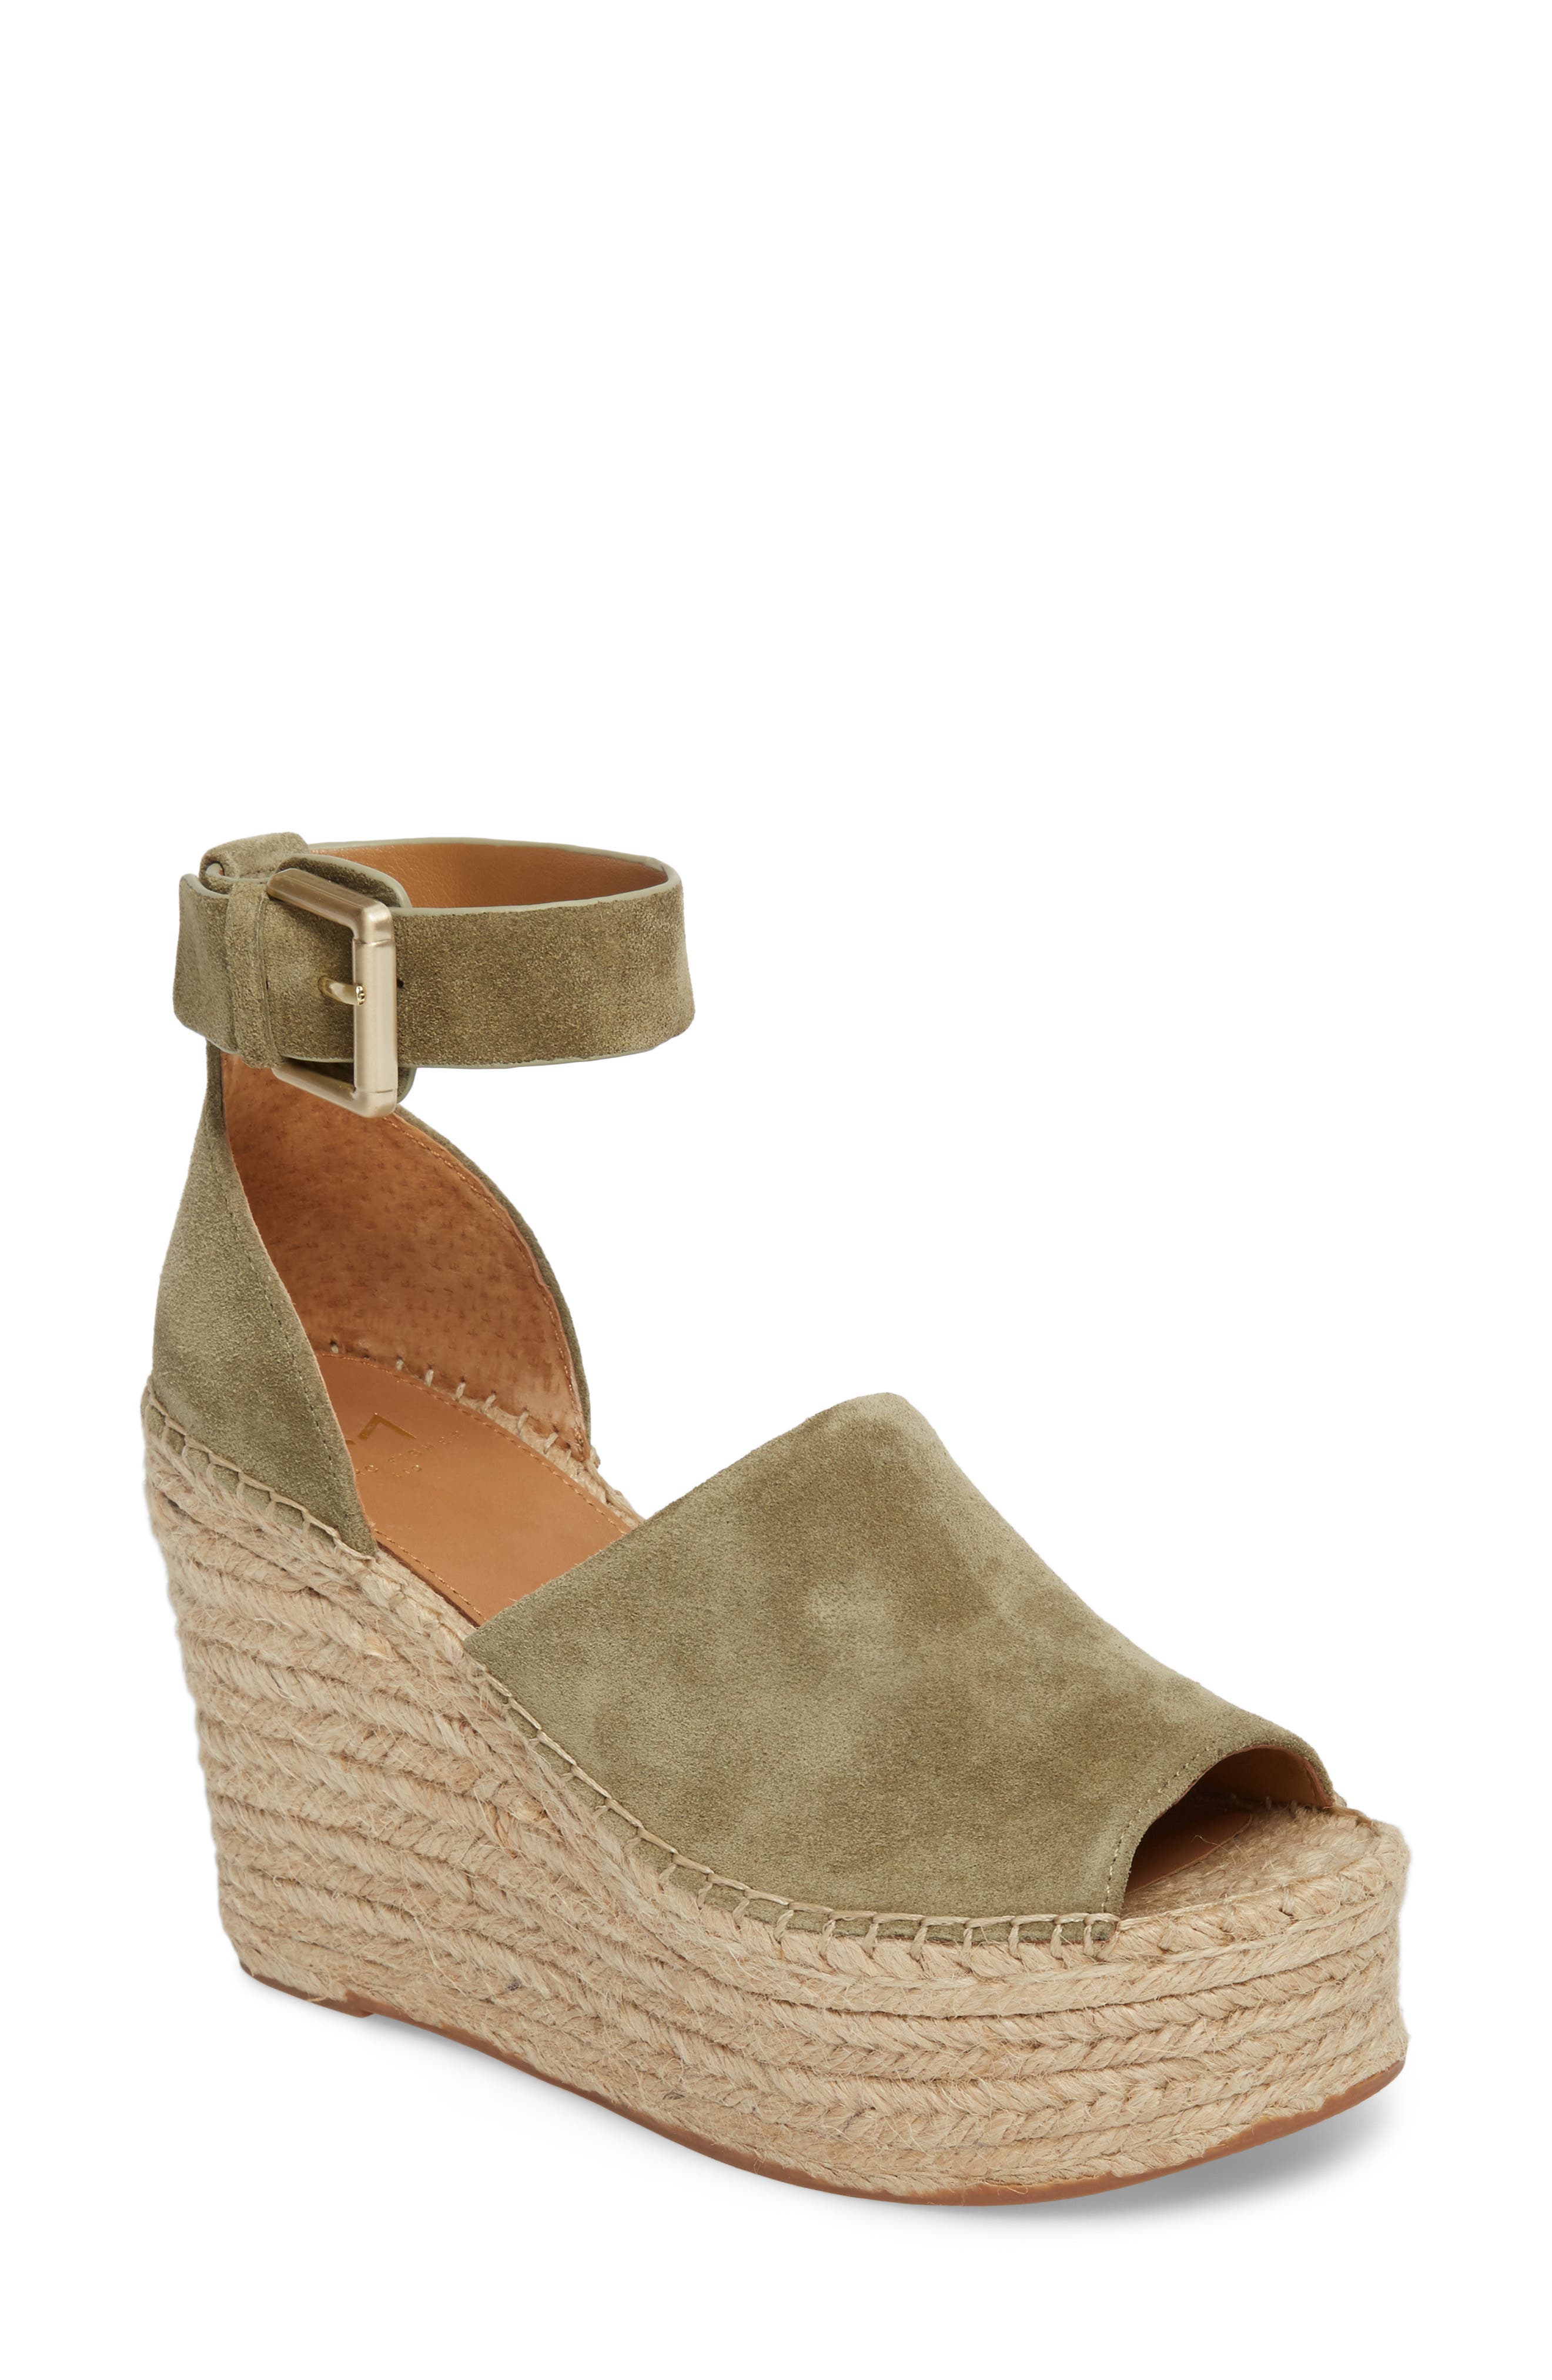 marc fisher tan wedges